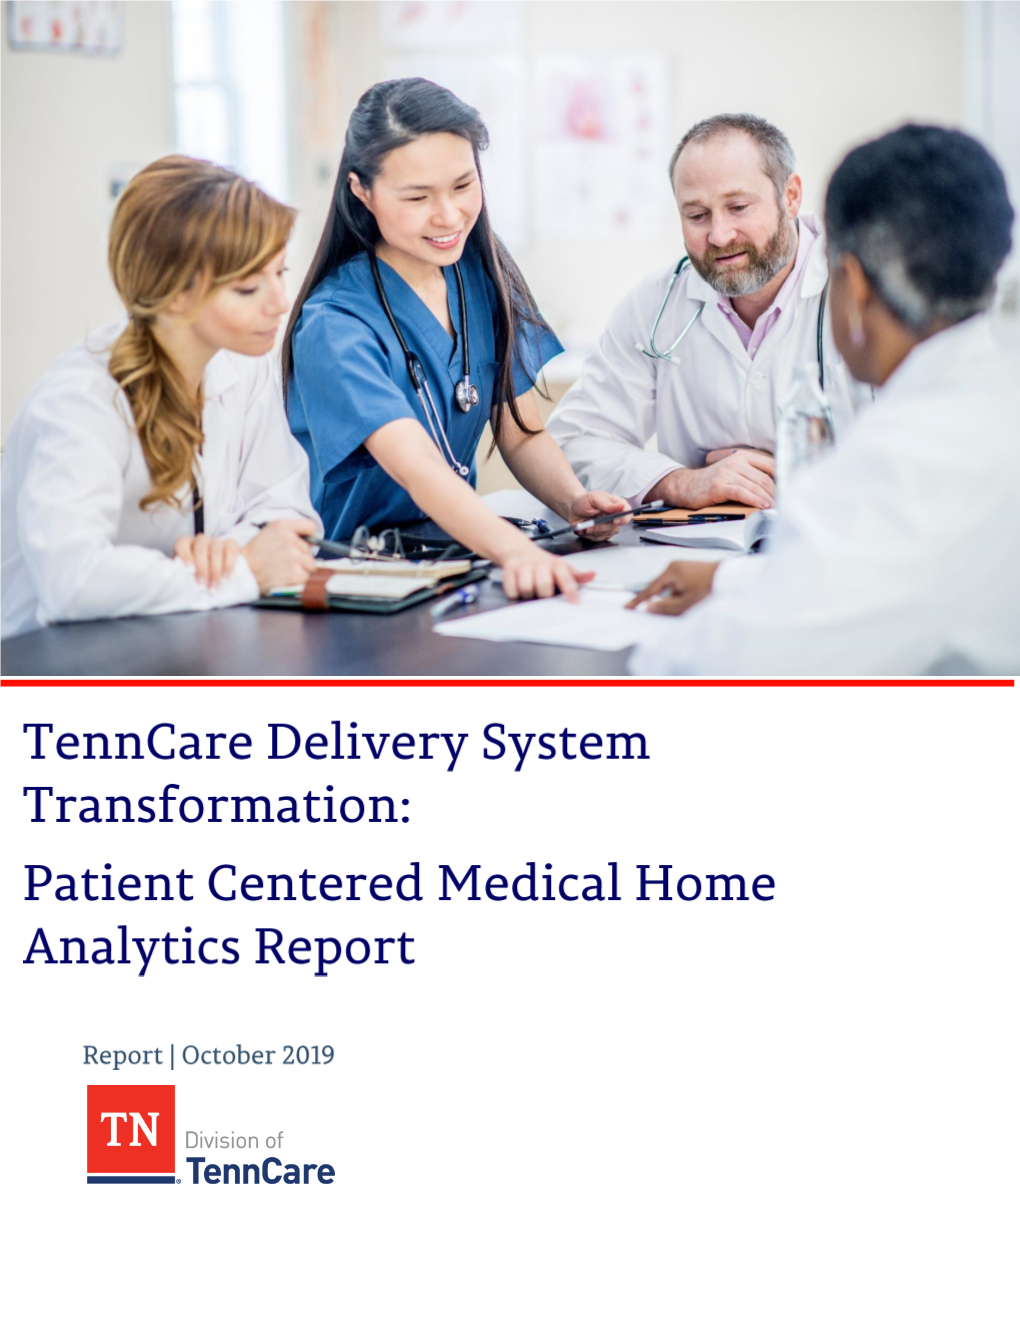 Patient-Centered Medical Home Analytics Report